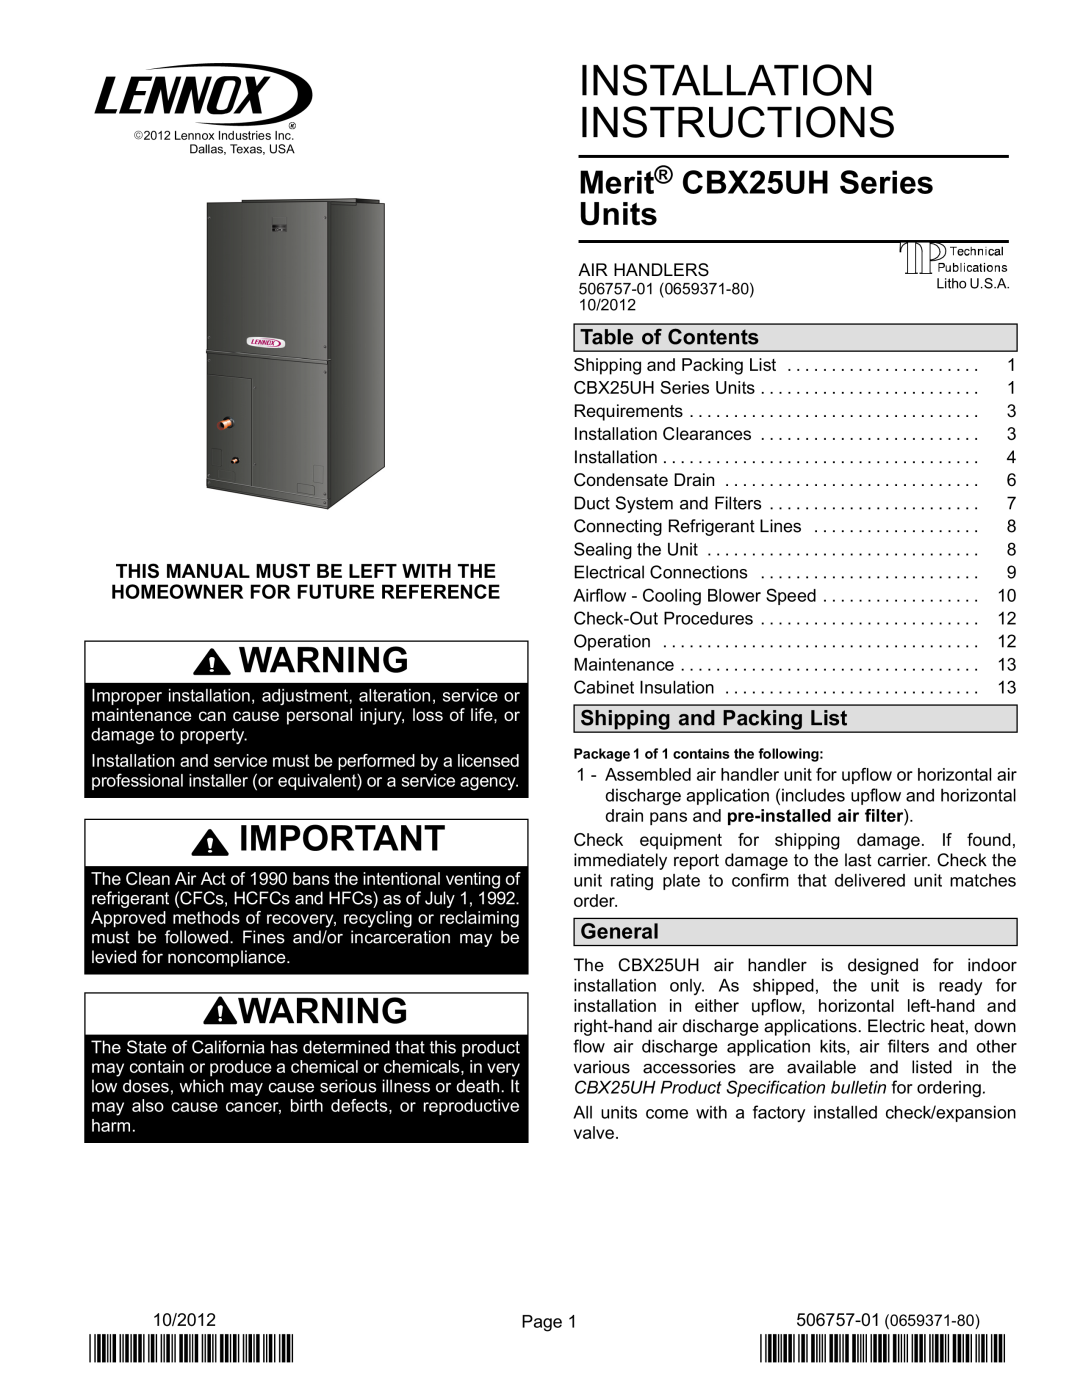 Lennox International Inc Merit CBX25UH Series installation instructions Table of Contents, Shipping and Packing List 